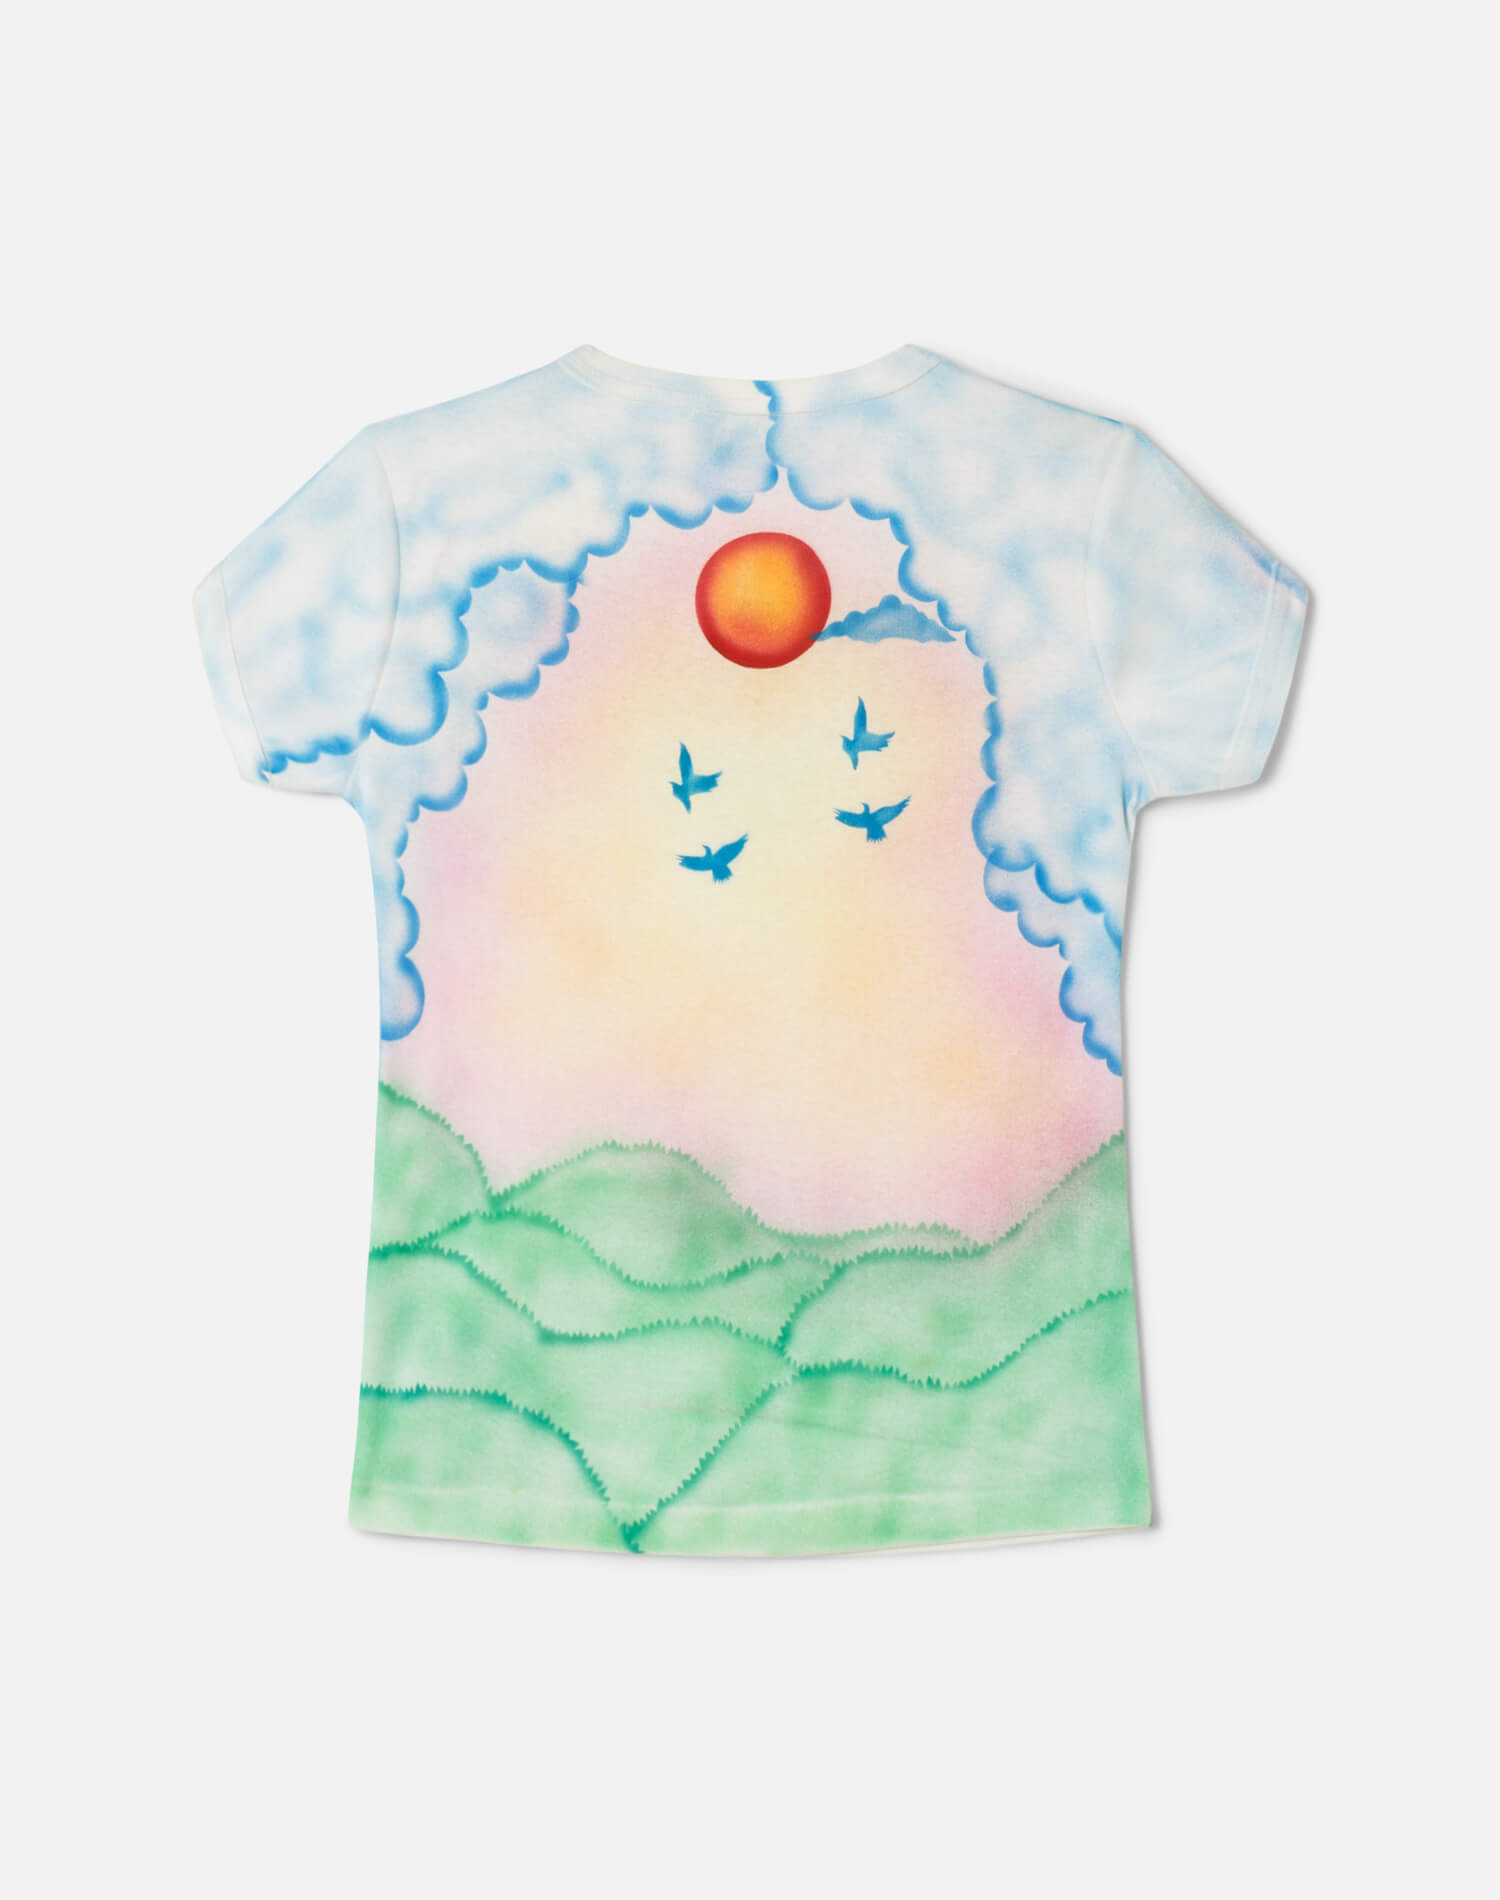 70s Airbrush Astral Threads Tee